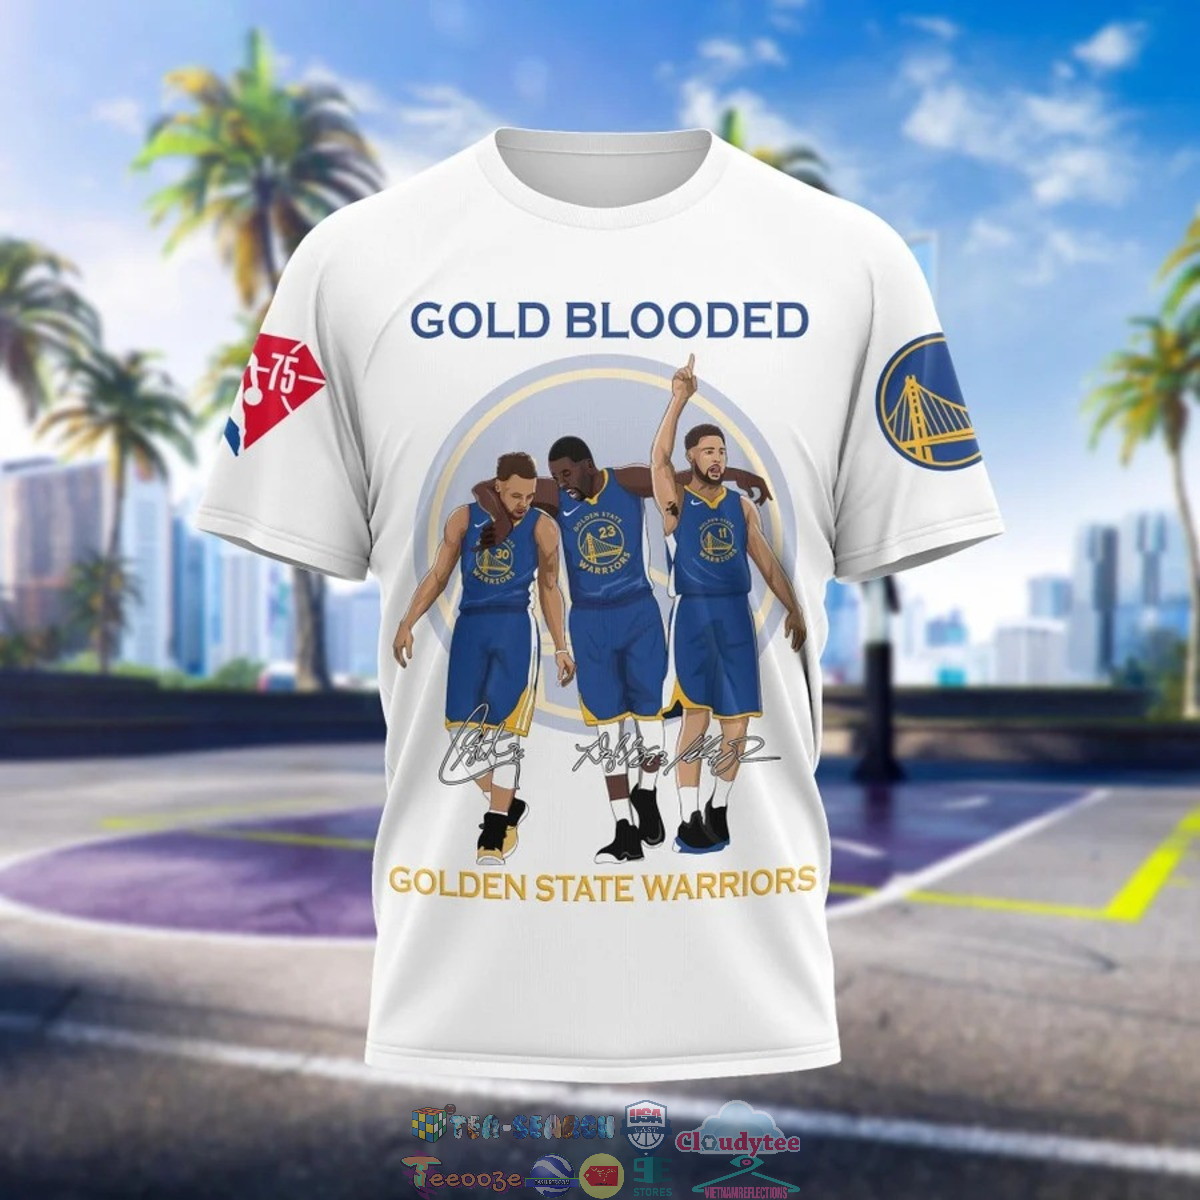 TOA7DVv8-TH030822-07xxxGold-Blooded-Golden-State-Warriors-White-3D-Shirt3.jpg